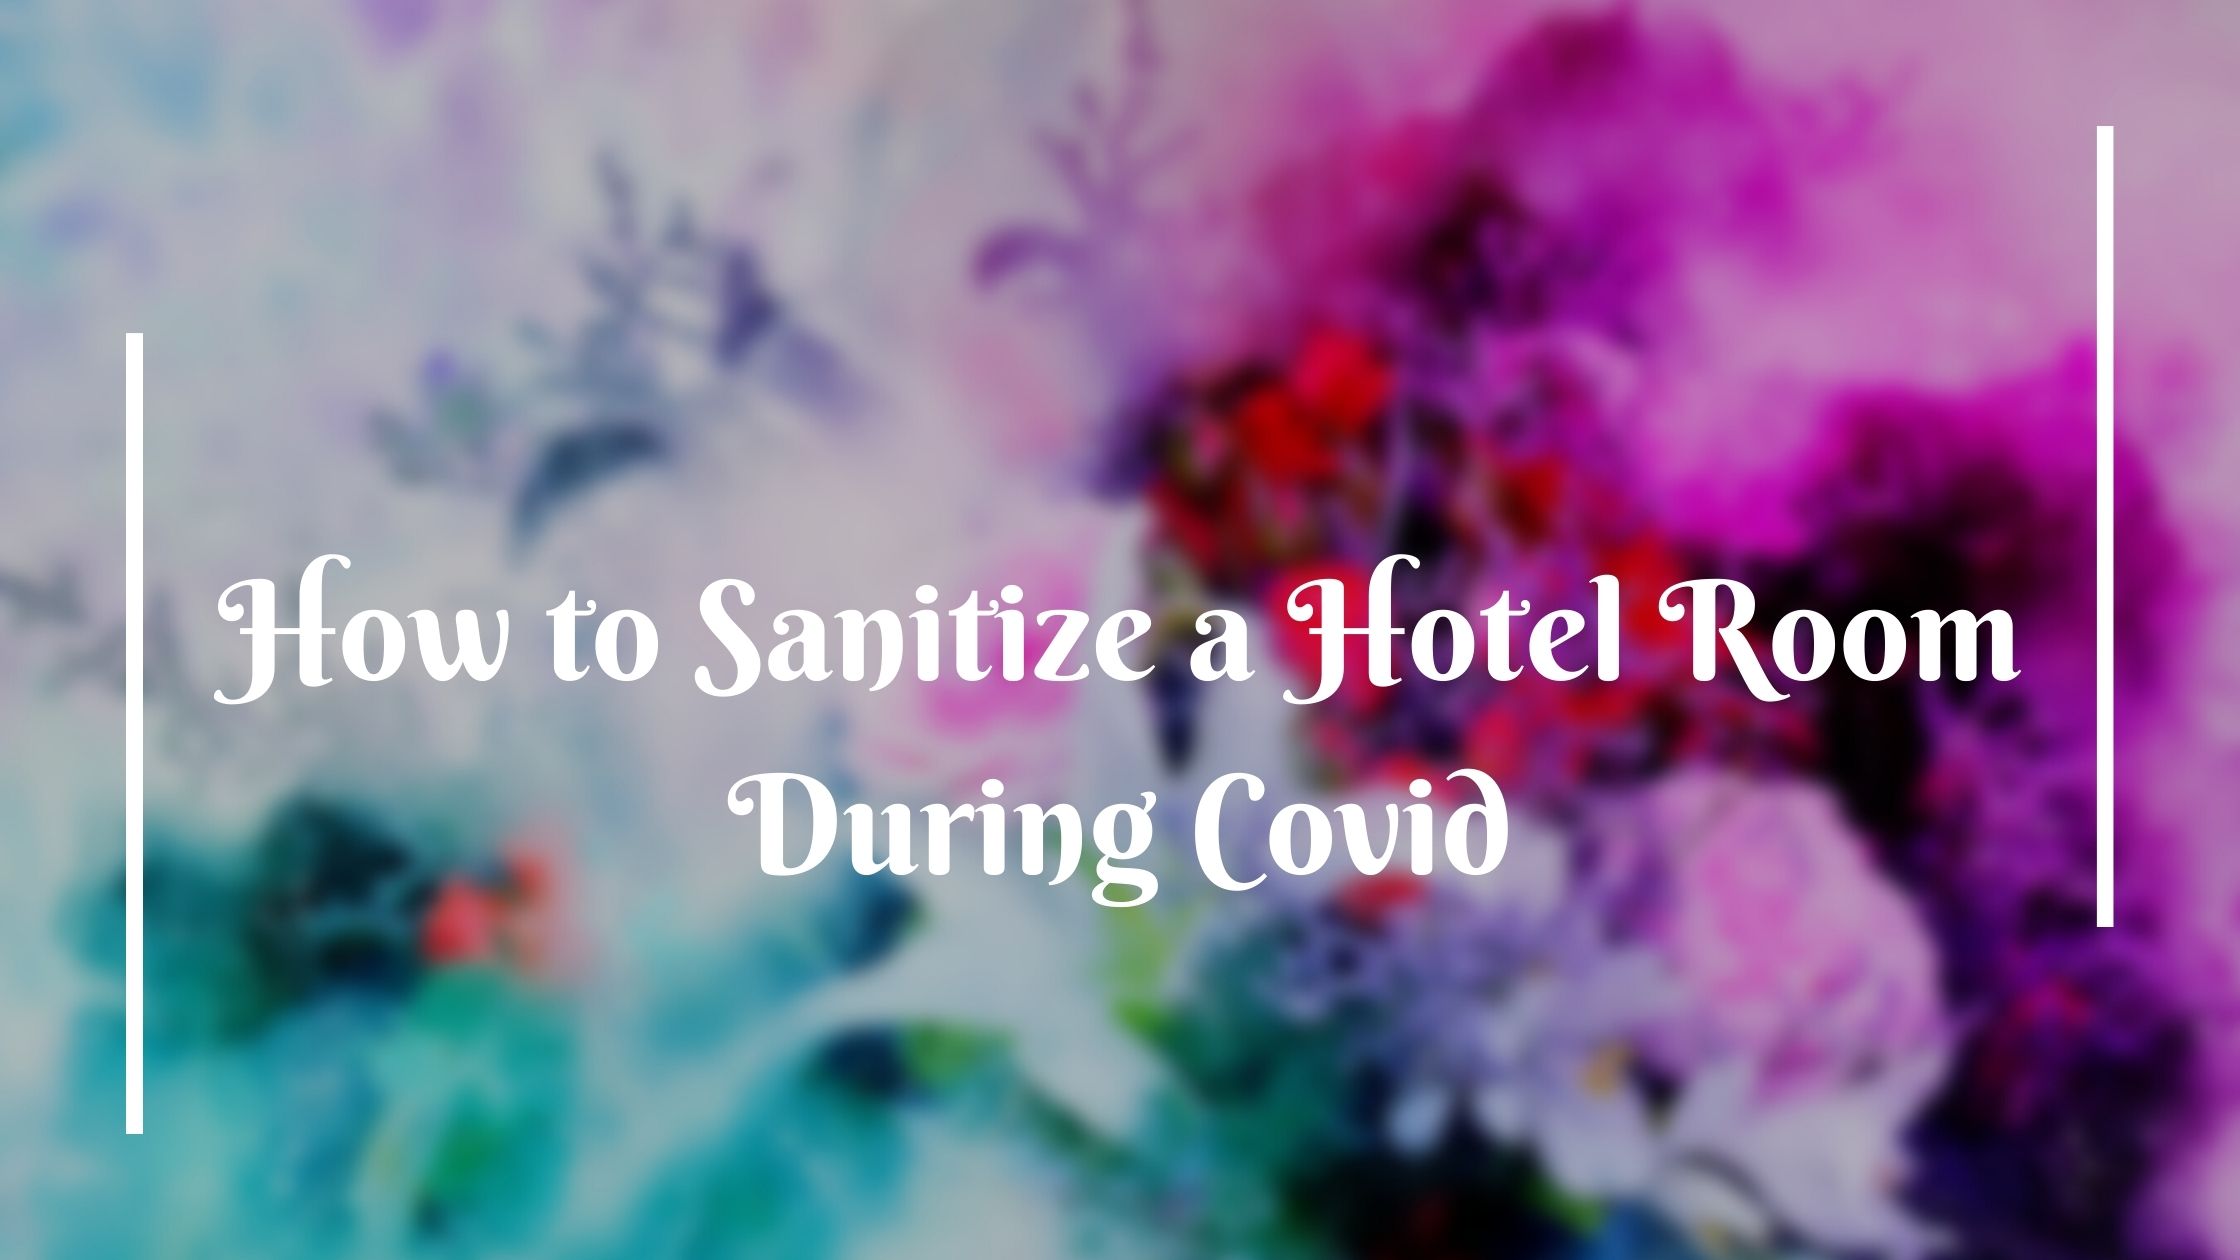 How to Sanitize a Hotel Room During Covid 5